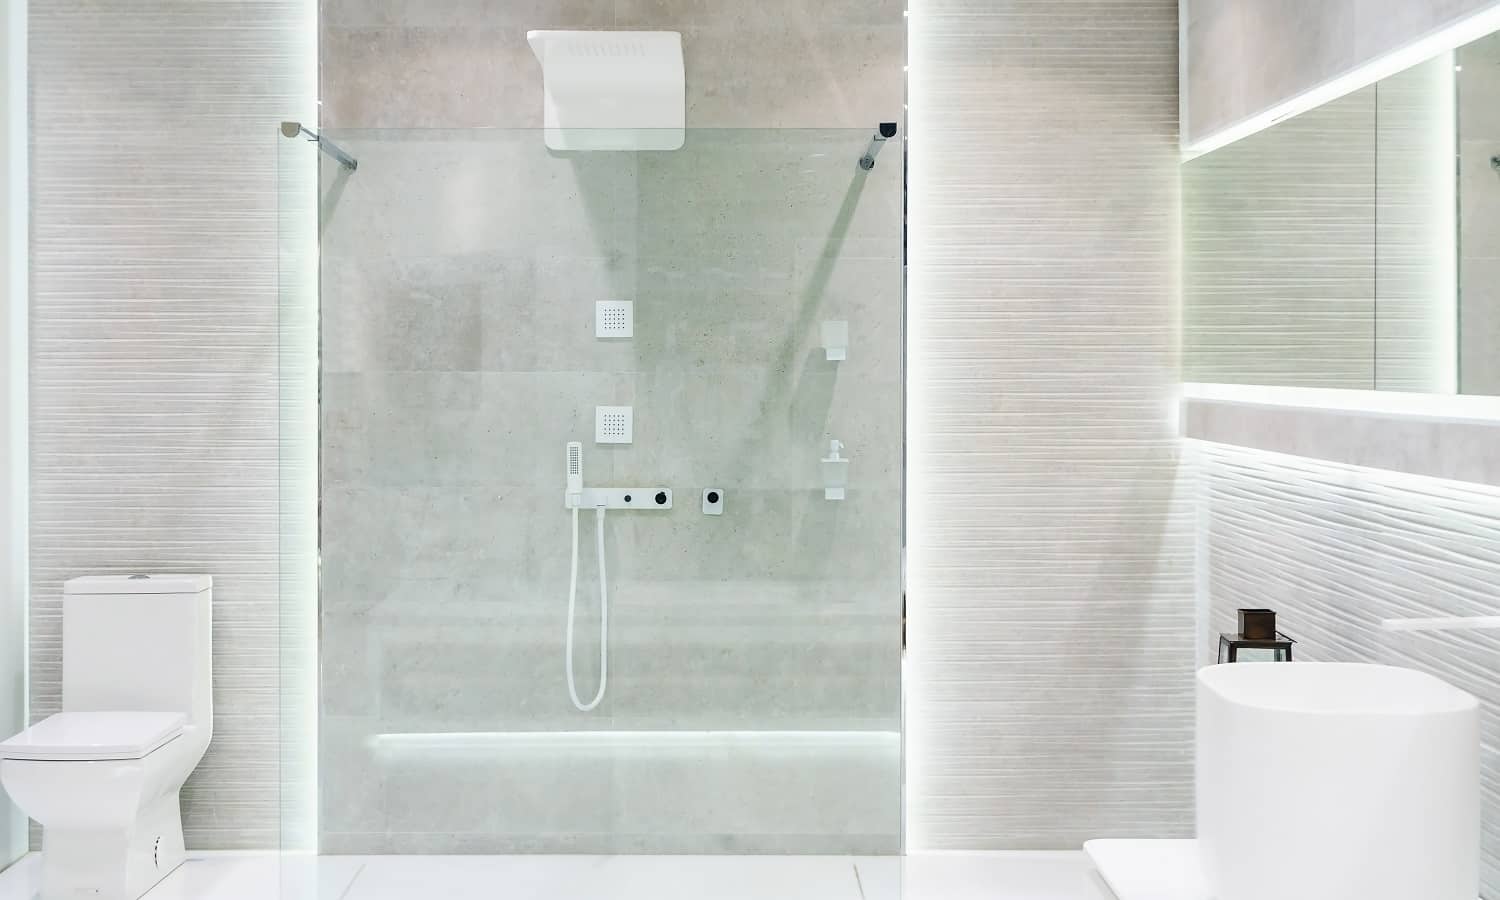 Bathroom interior with white walls, a shower cabin with glass wall, a toilet and sink